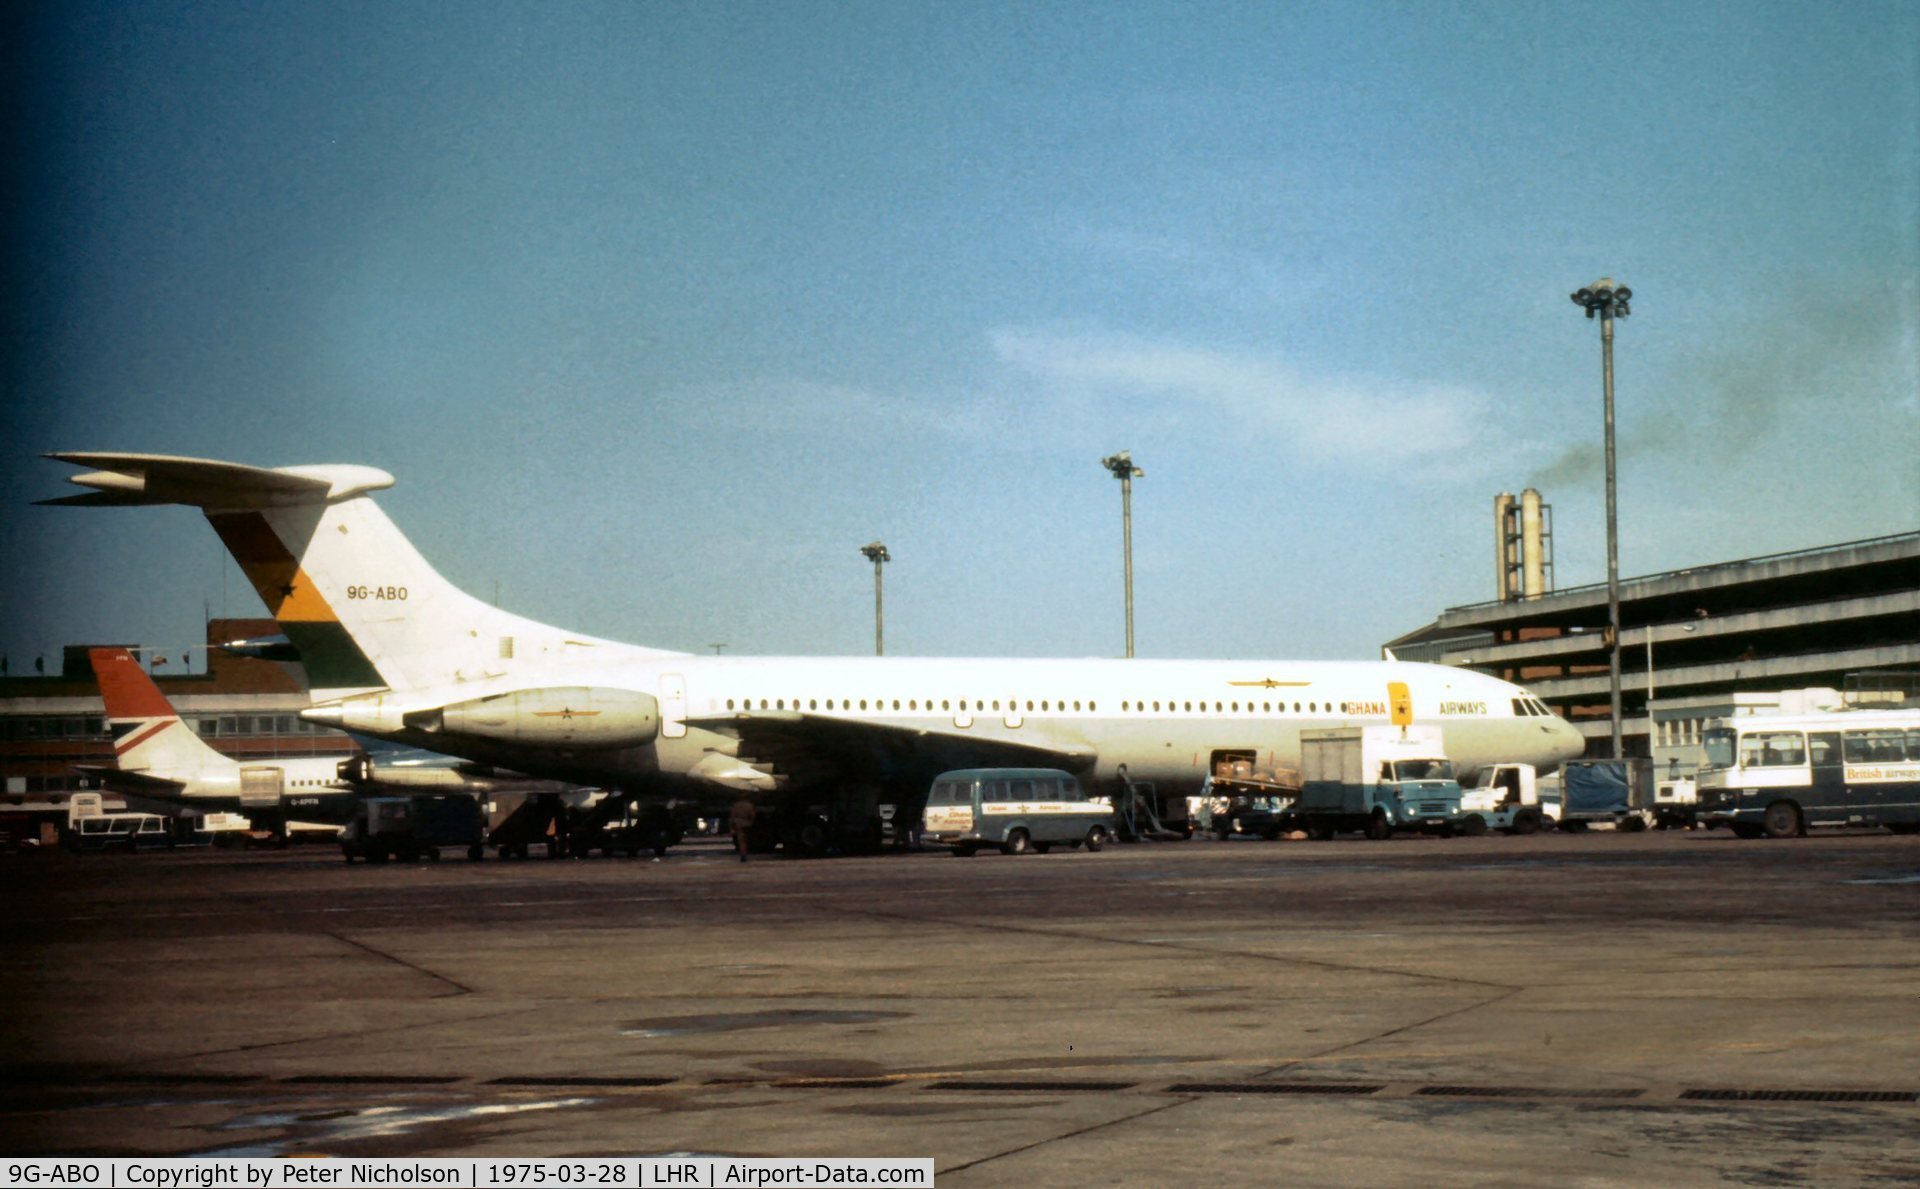 9G-ABO, 1964 Vickers VC10 Srs 1102 C/N 823, VC-10 operated by Ghana Airways seen at Heathrow in the Spring of 1975.